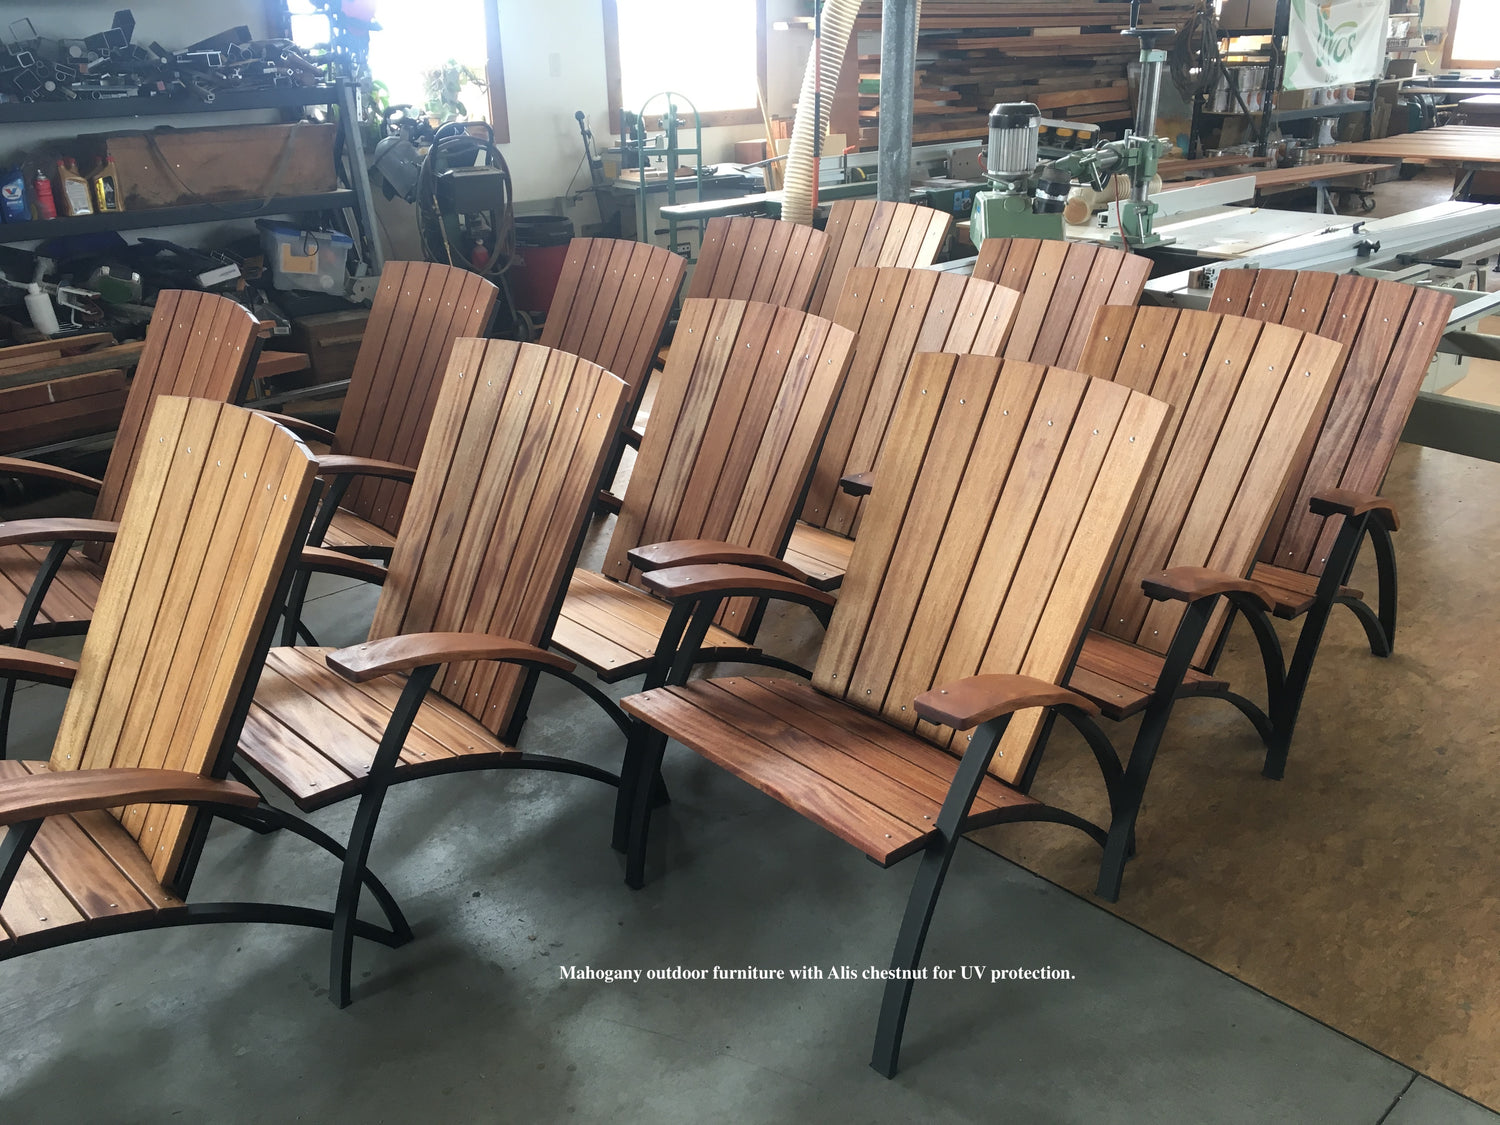 Mahogany outdoor chairs with Alis chestnut for UV protection.